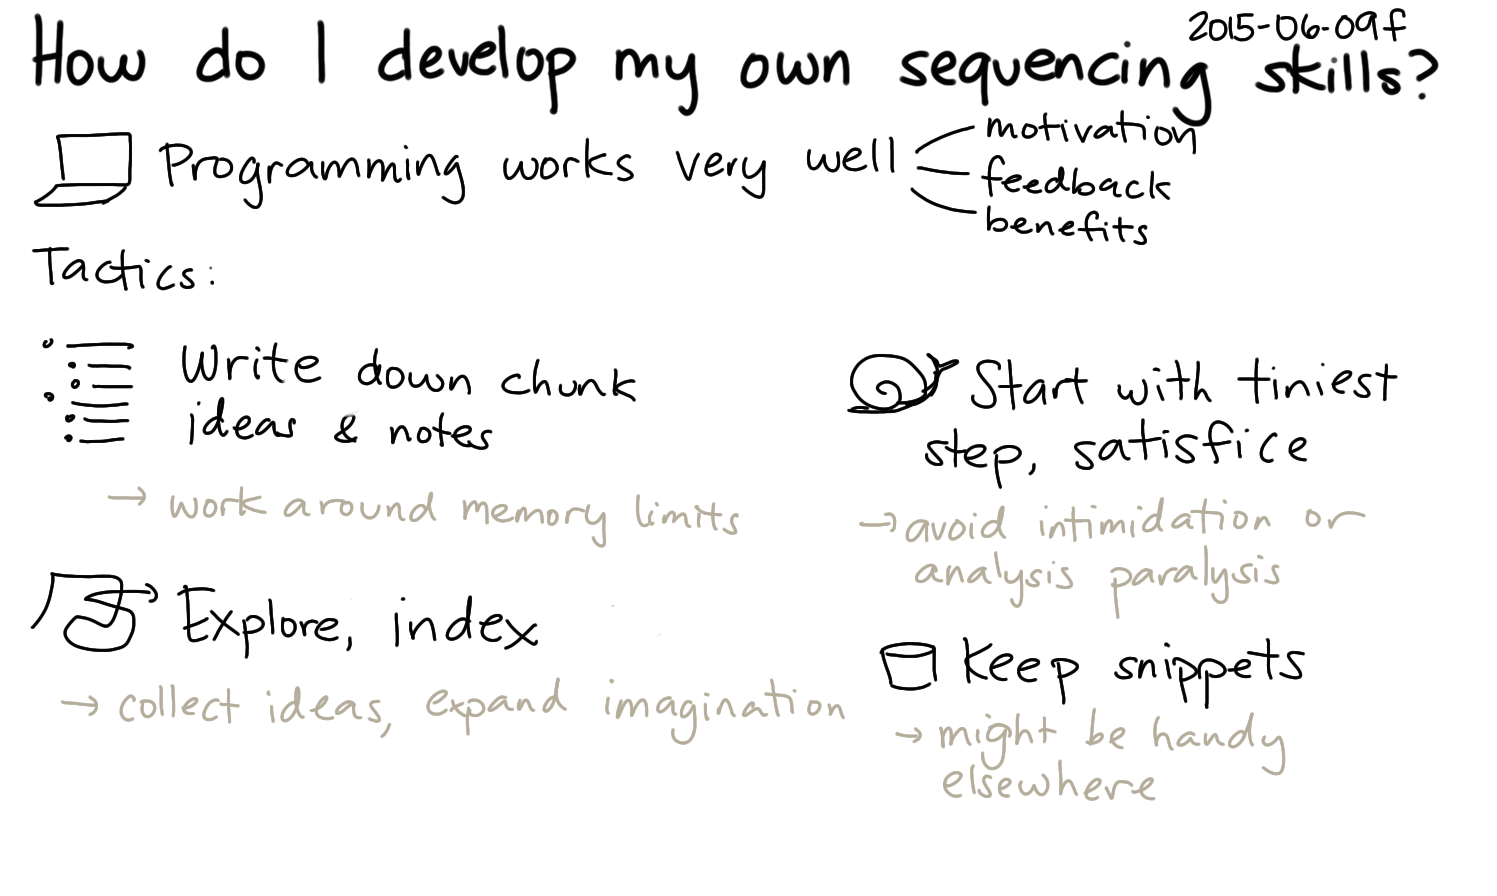 2015-06-09f How do I develop my own sequencing skills -- index card #learning #problem-solving #sequencing.png